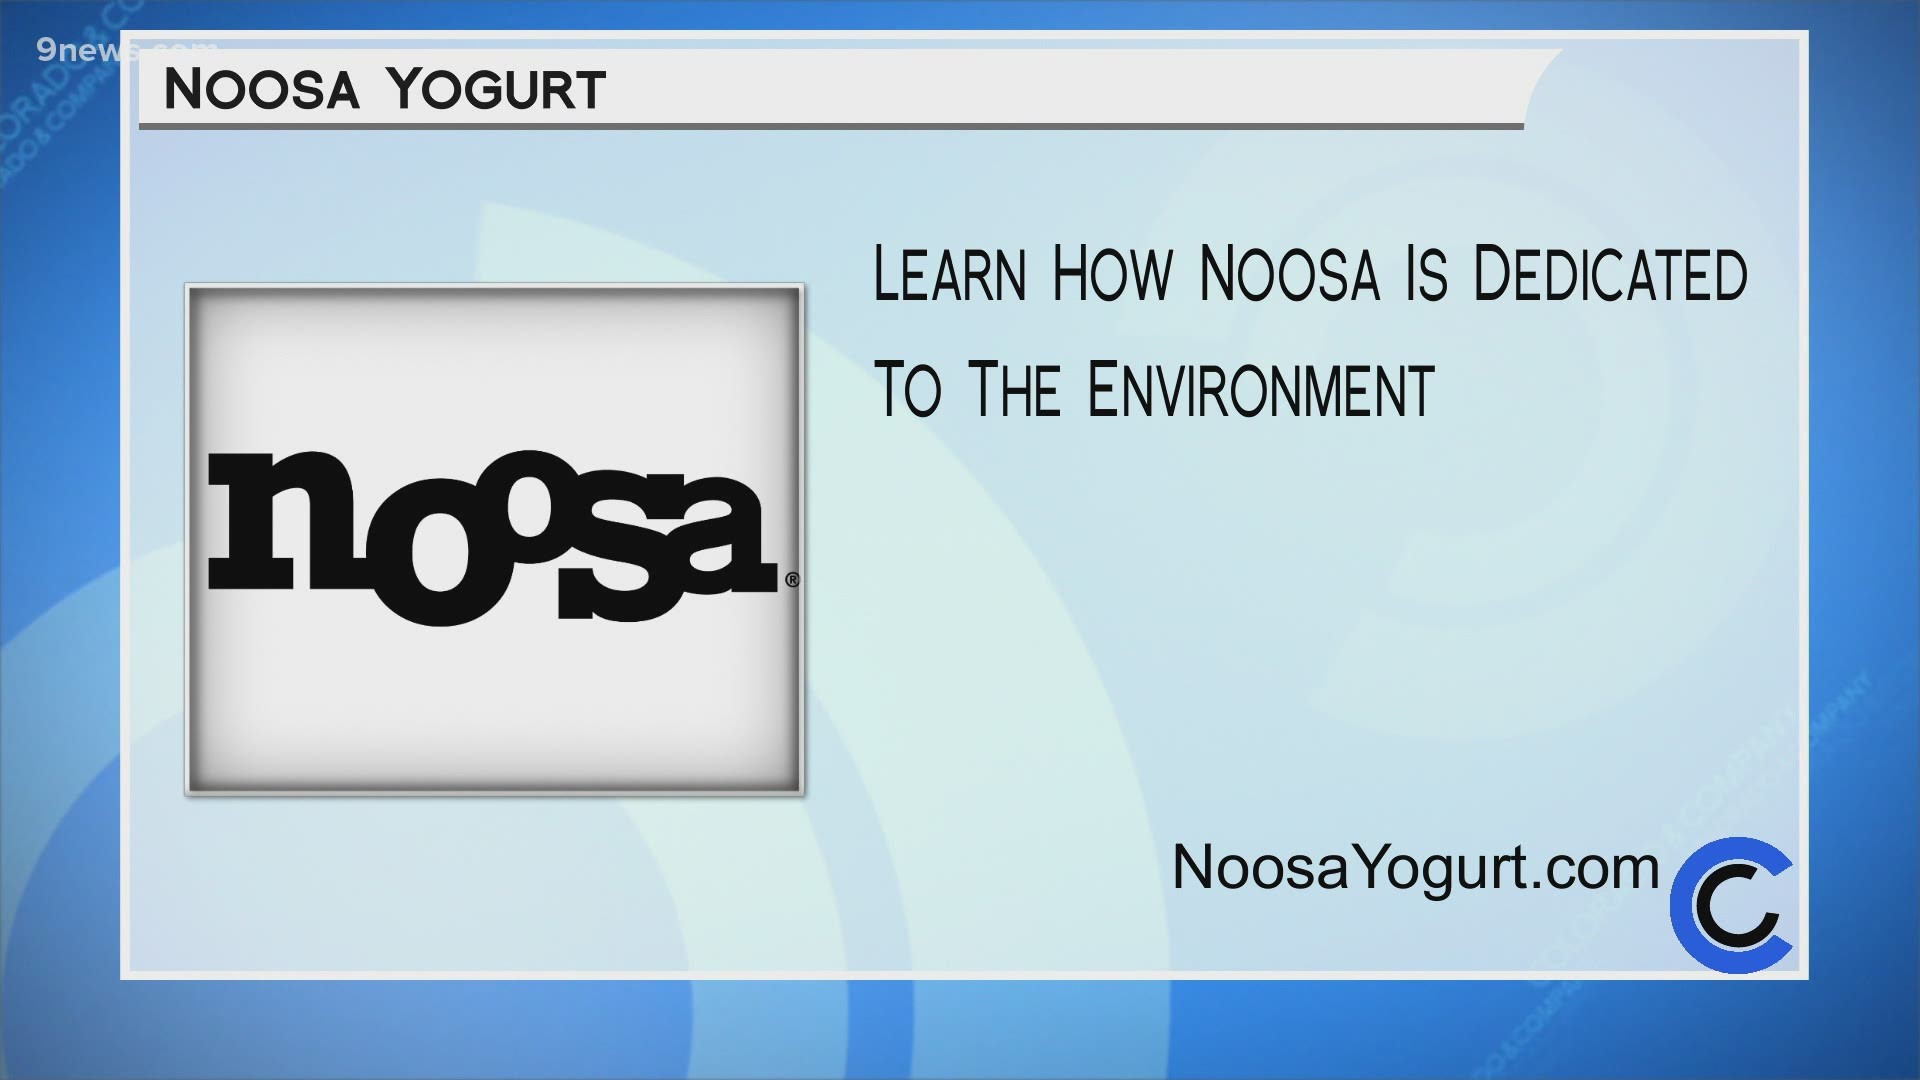 Visit NoosaYoghurt.com to learn more about how Noosa is dedicated to protecting the environment in Colorado.